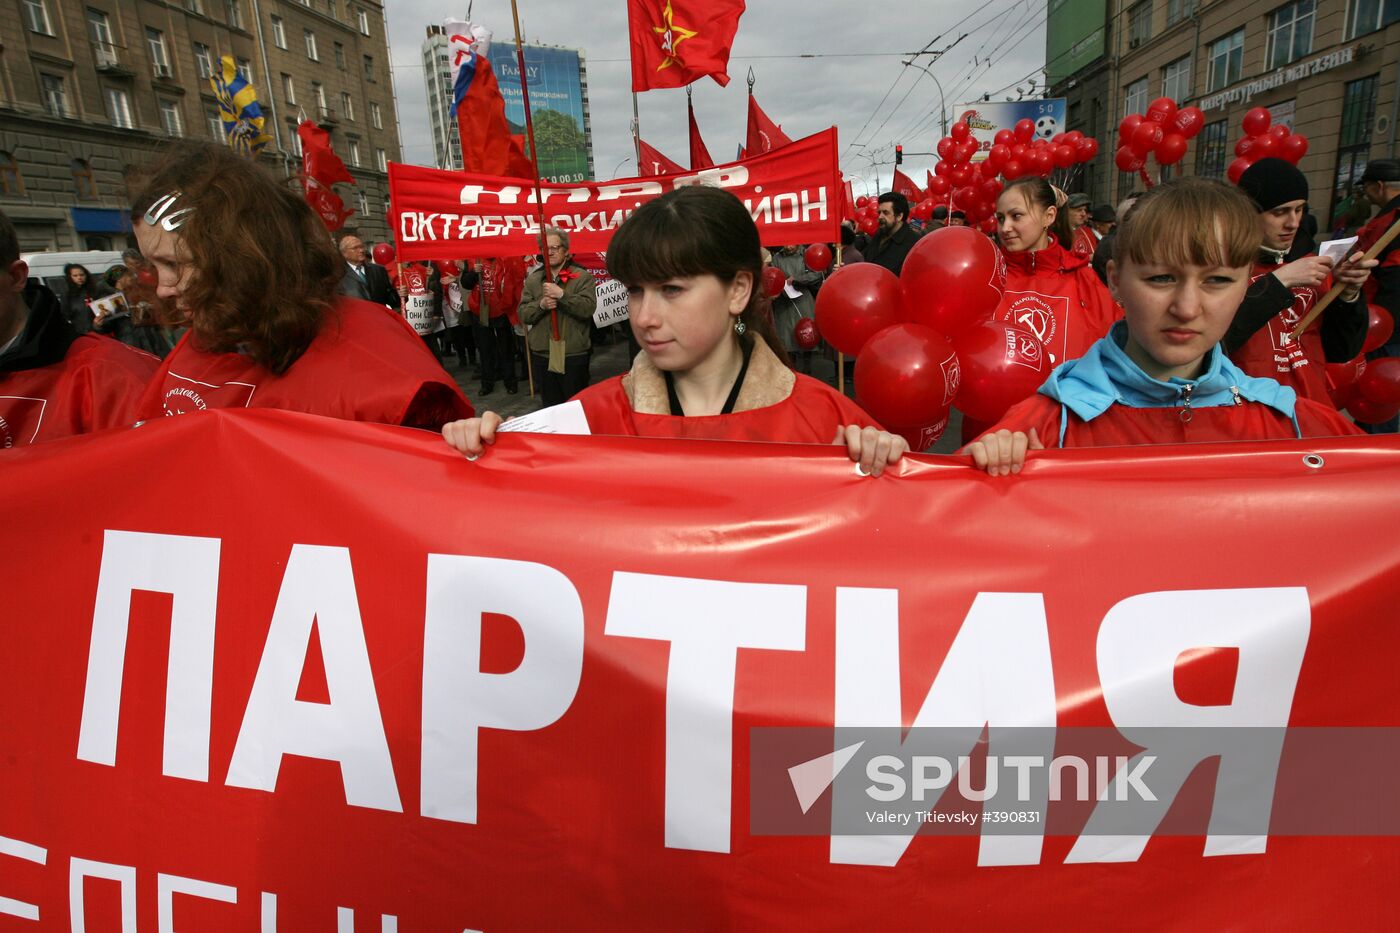 Spring and Labor Day march in Novosibirsk